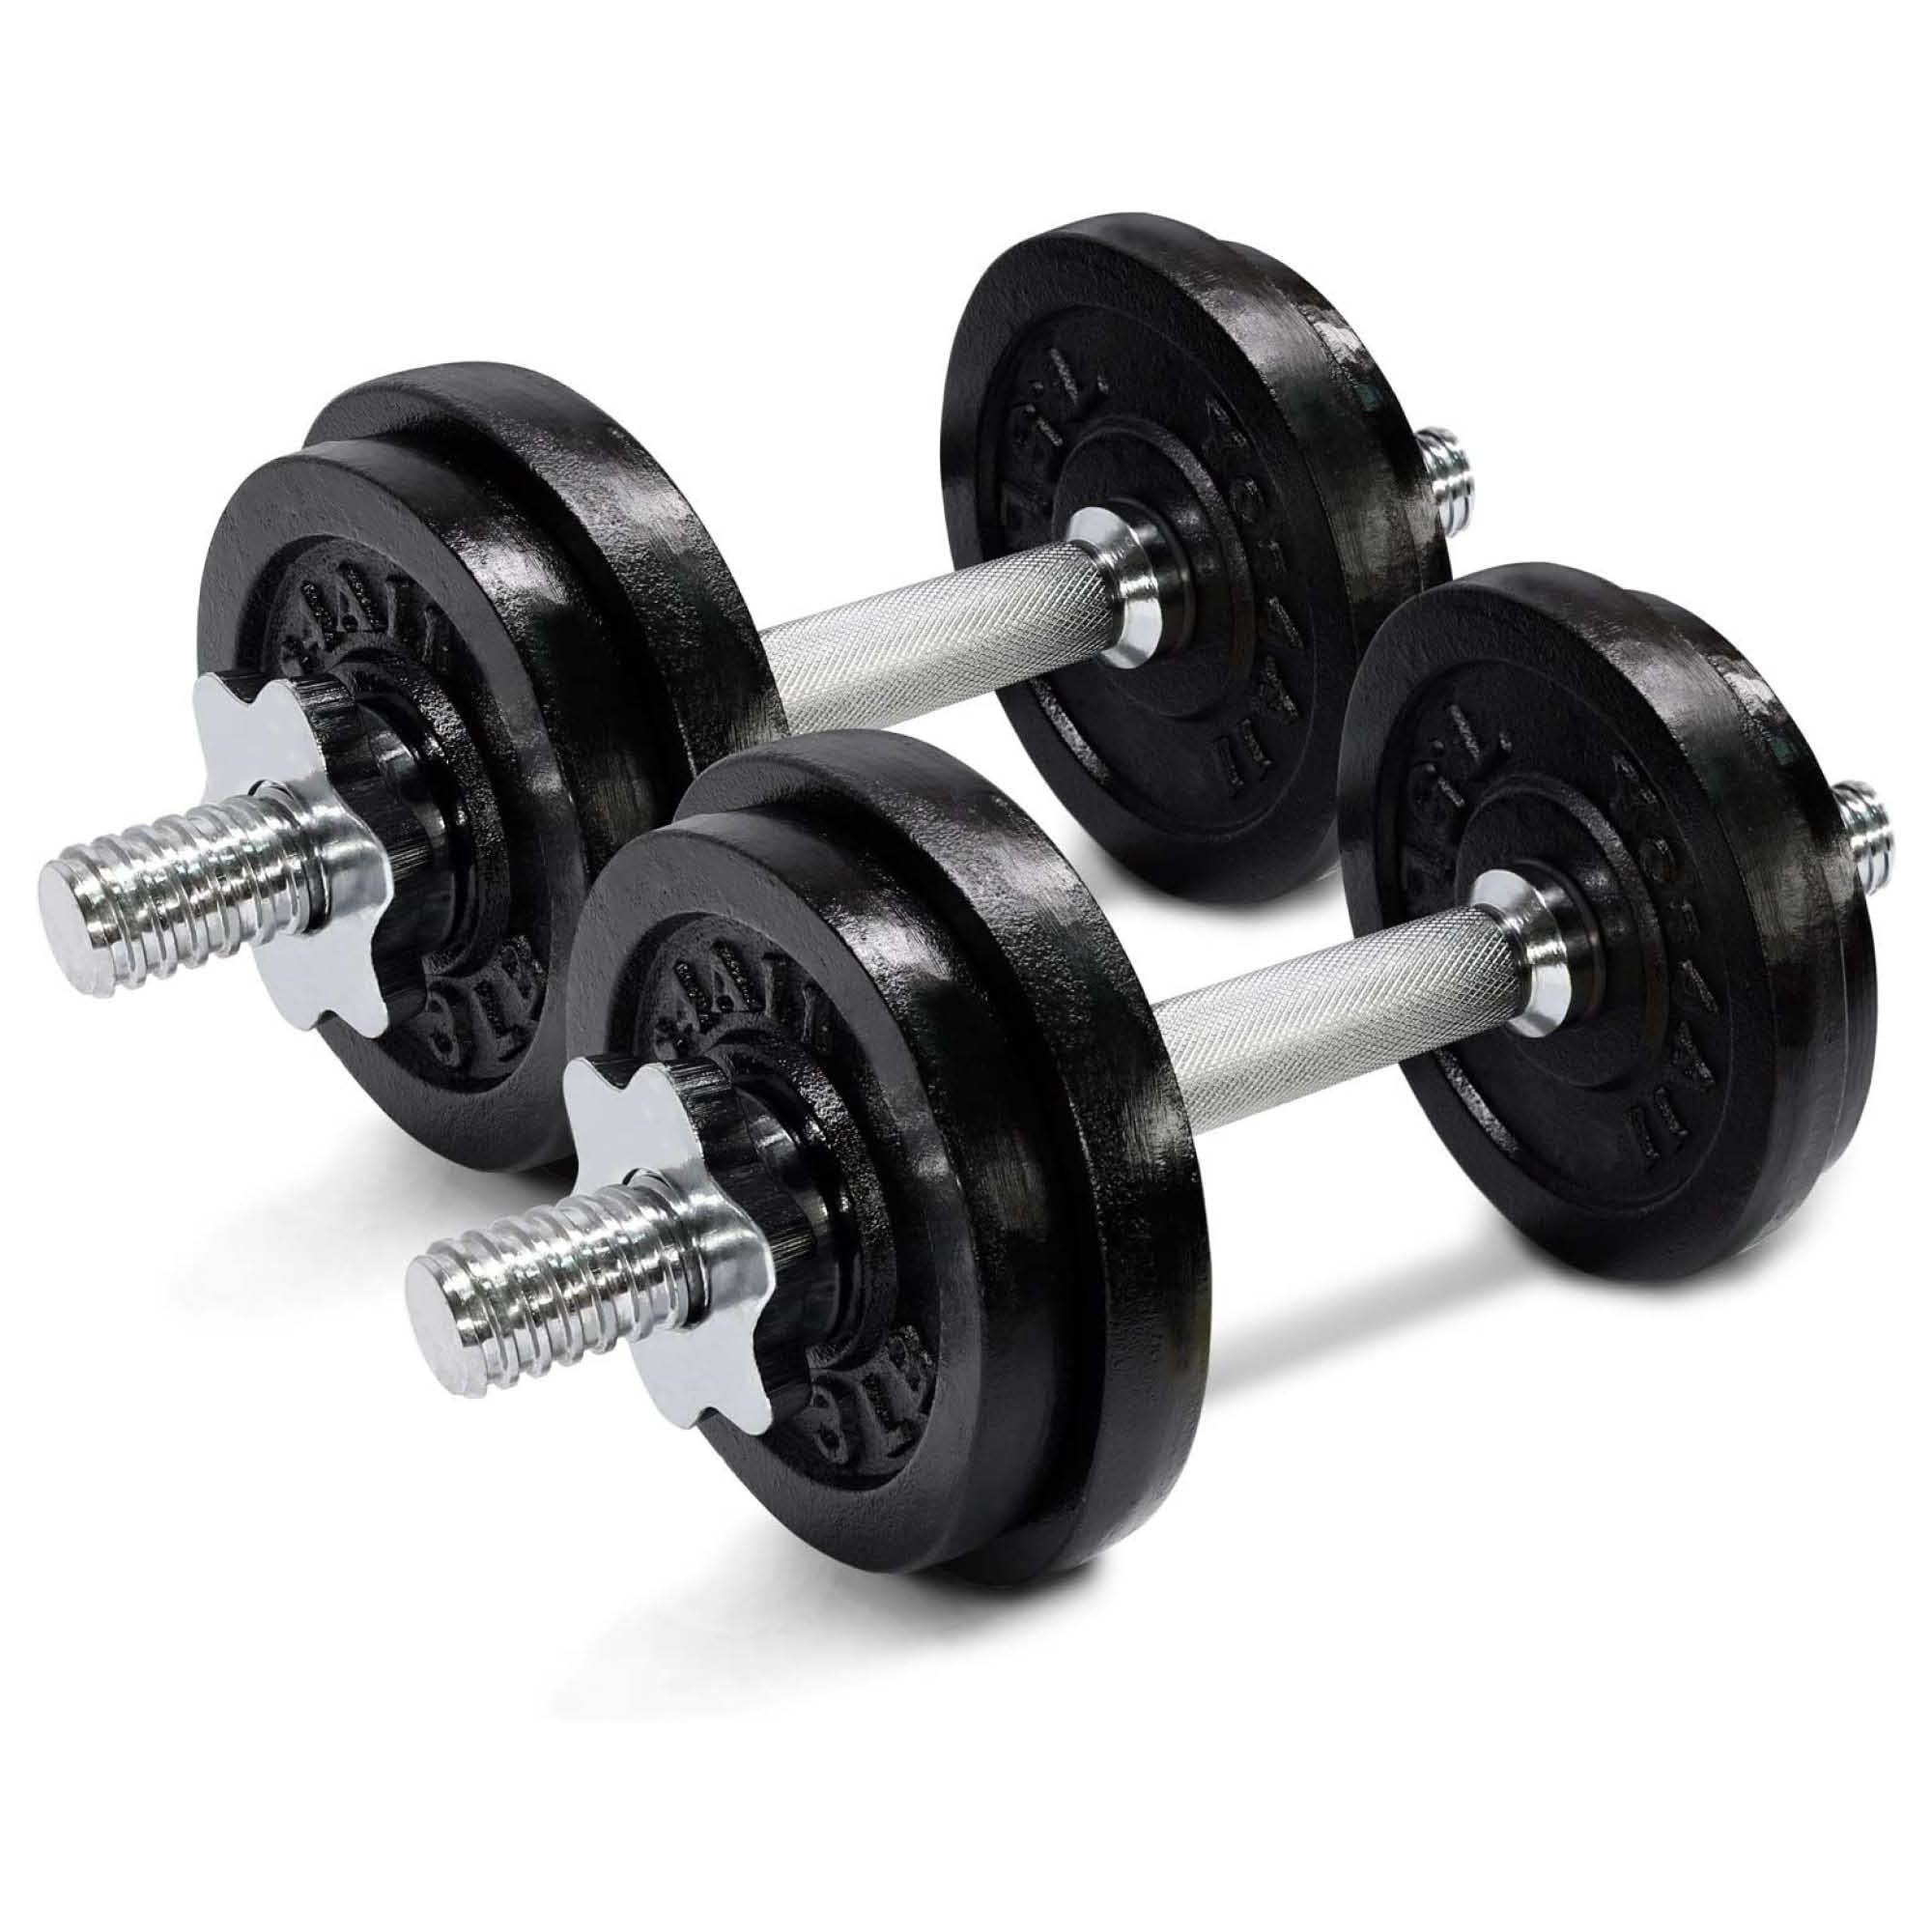 Details about   Adjustable Dumbbell Home Dumbbell Ladies Dumbbell Home Gym Workout Fitness 